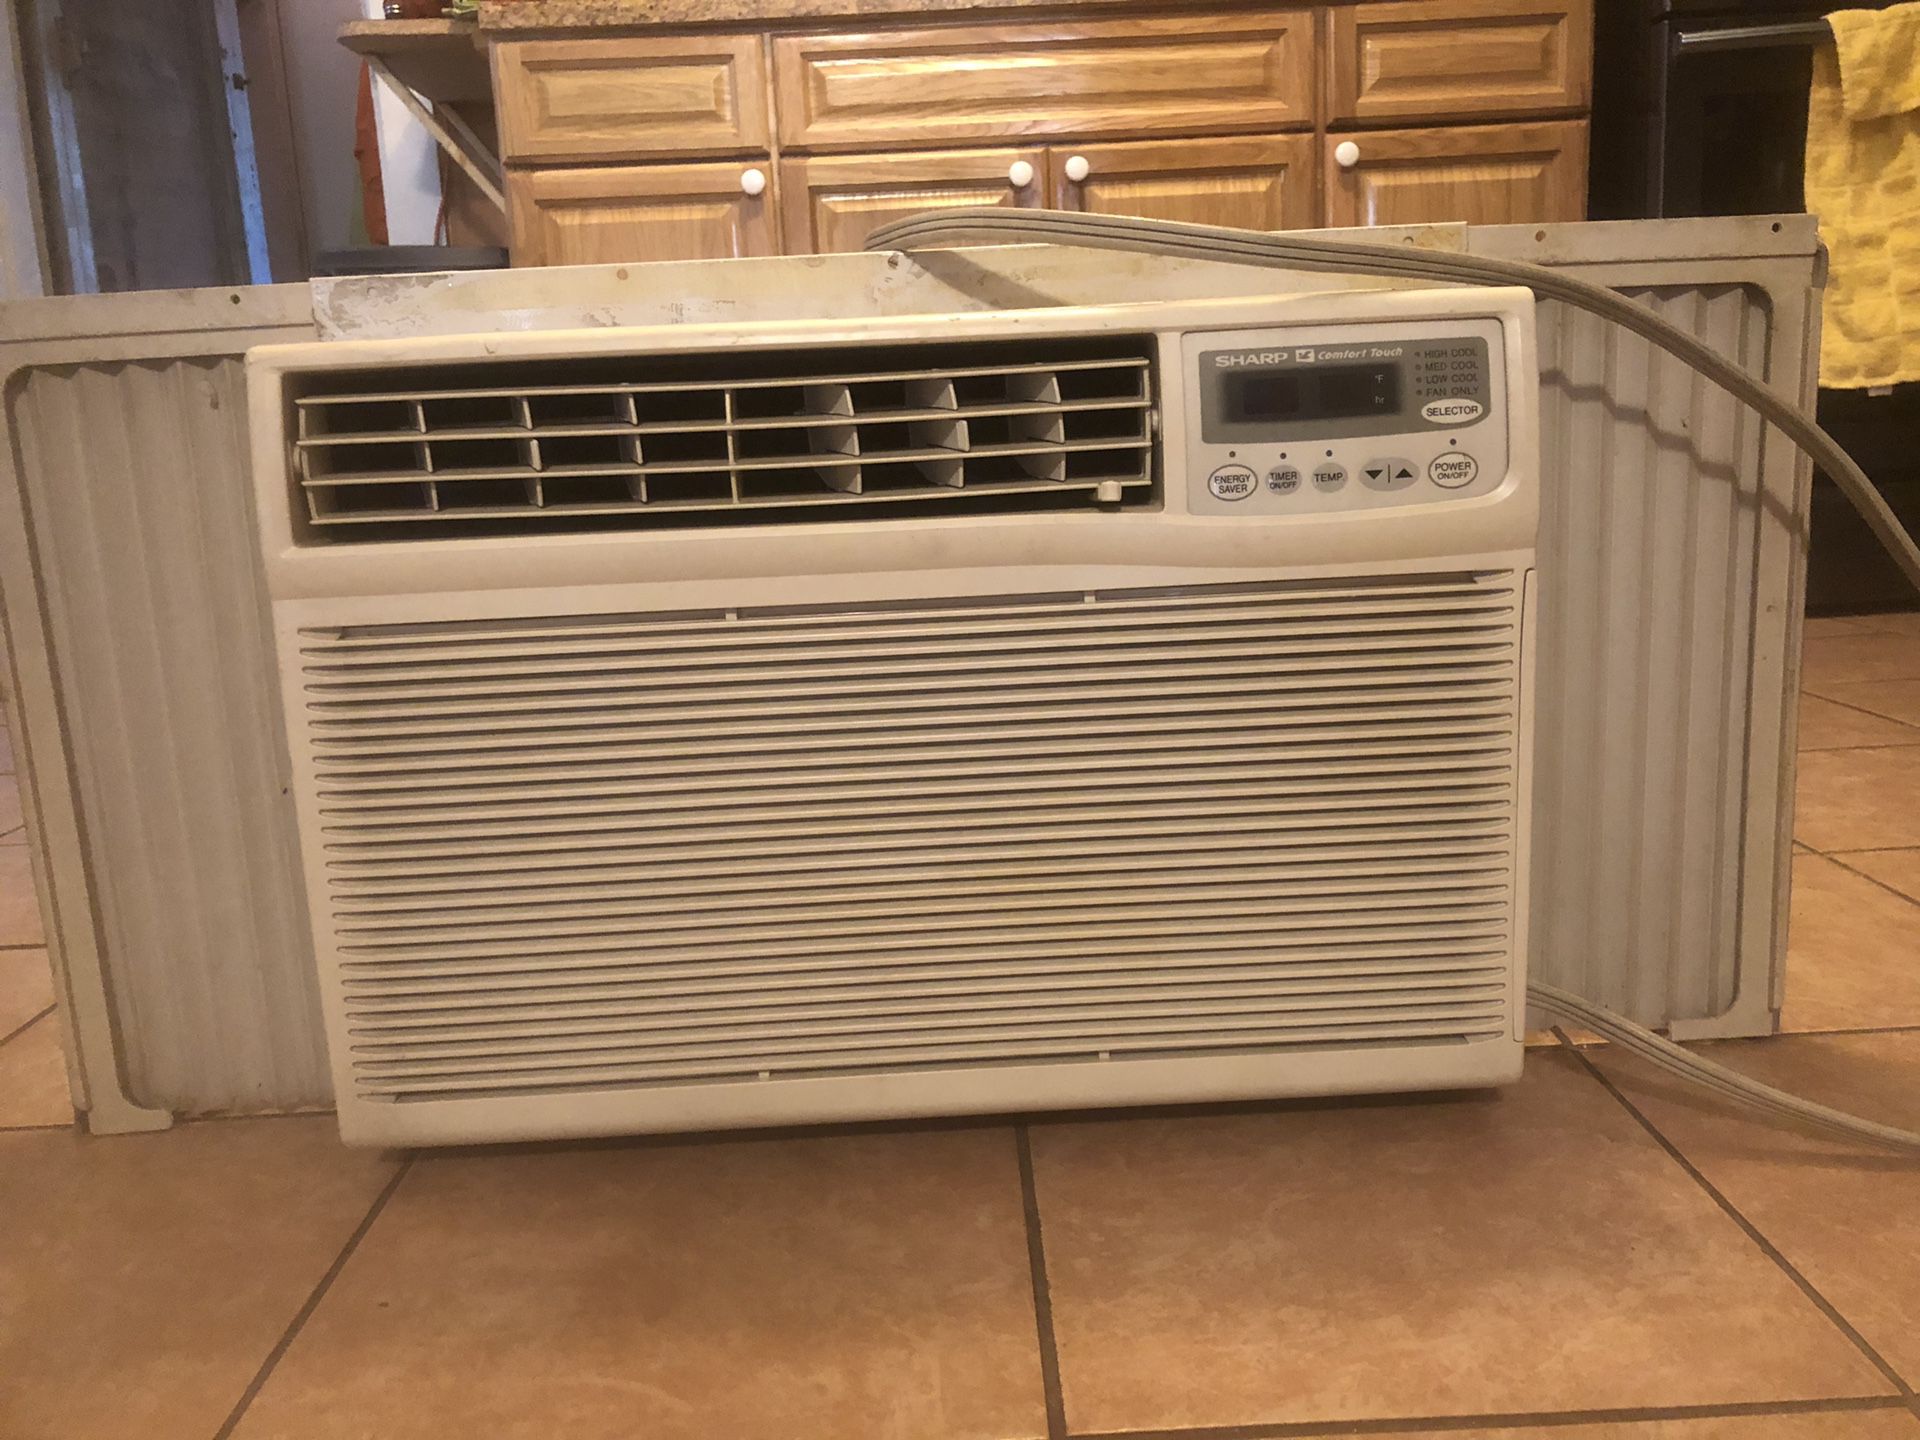 Sharp air conditioner 12000 Btu works great I try on before you buy it!